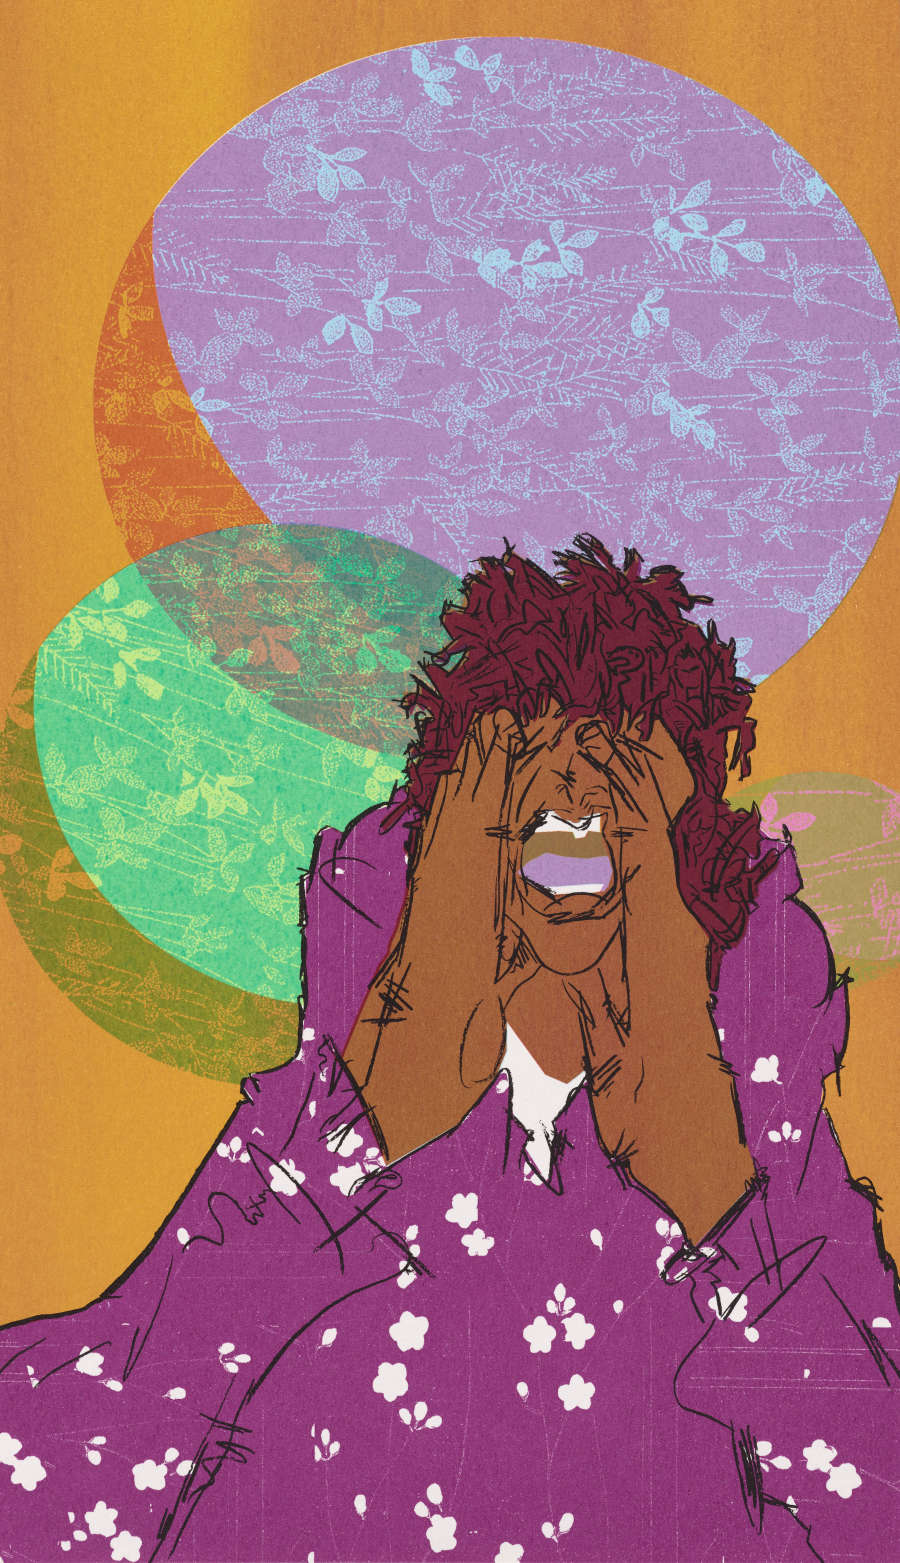 Print of a screaming brown figure with their head in their hands. The figure, wearing a floral purple dress, sits against a yellow background with three floral-patterned circles behind her. 